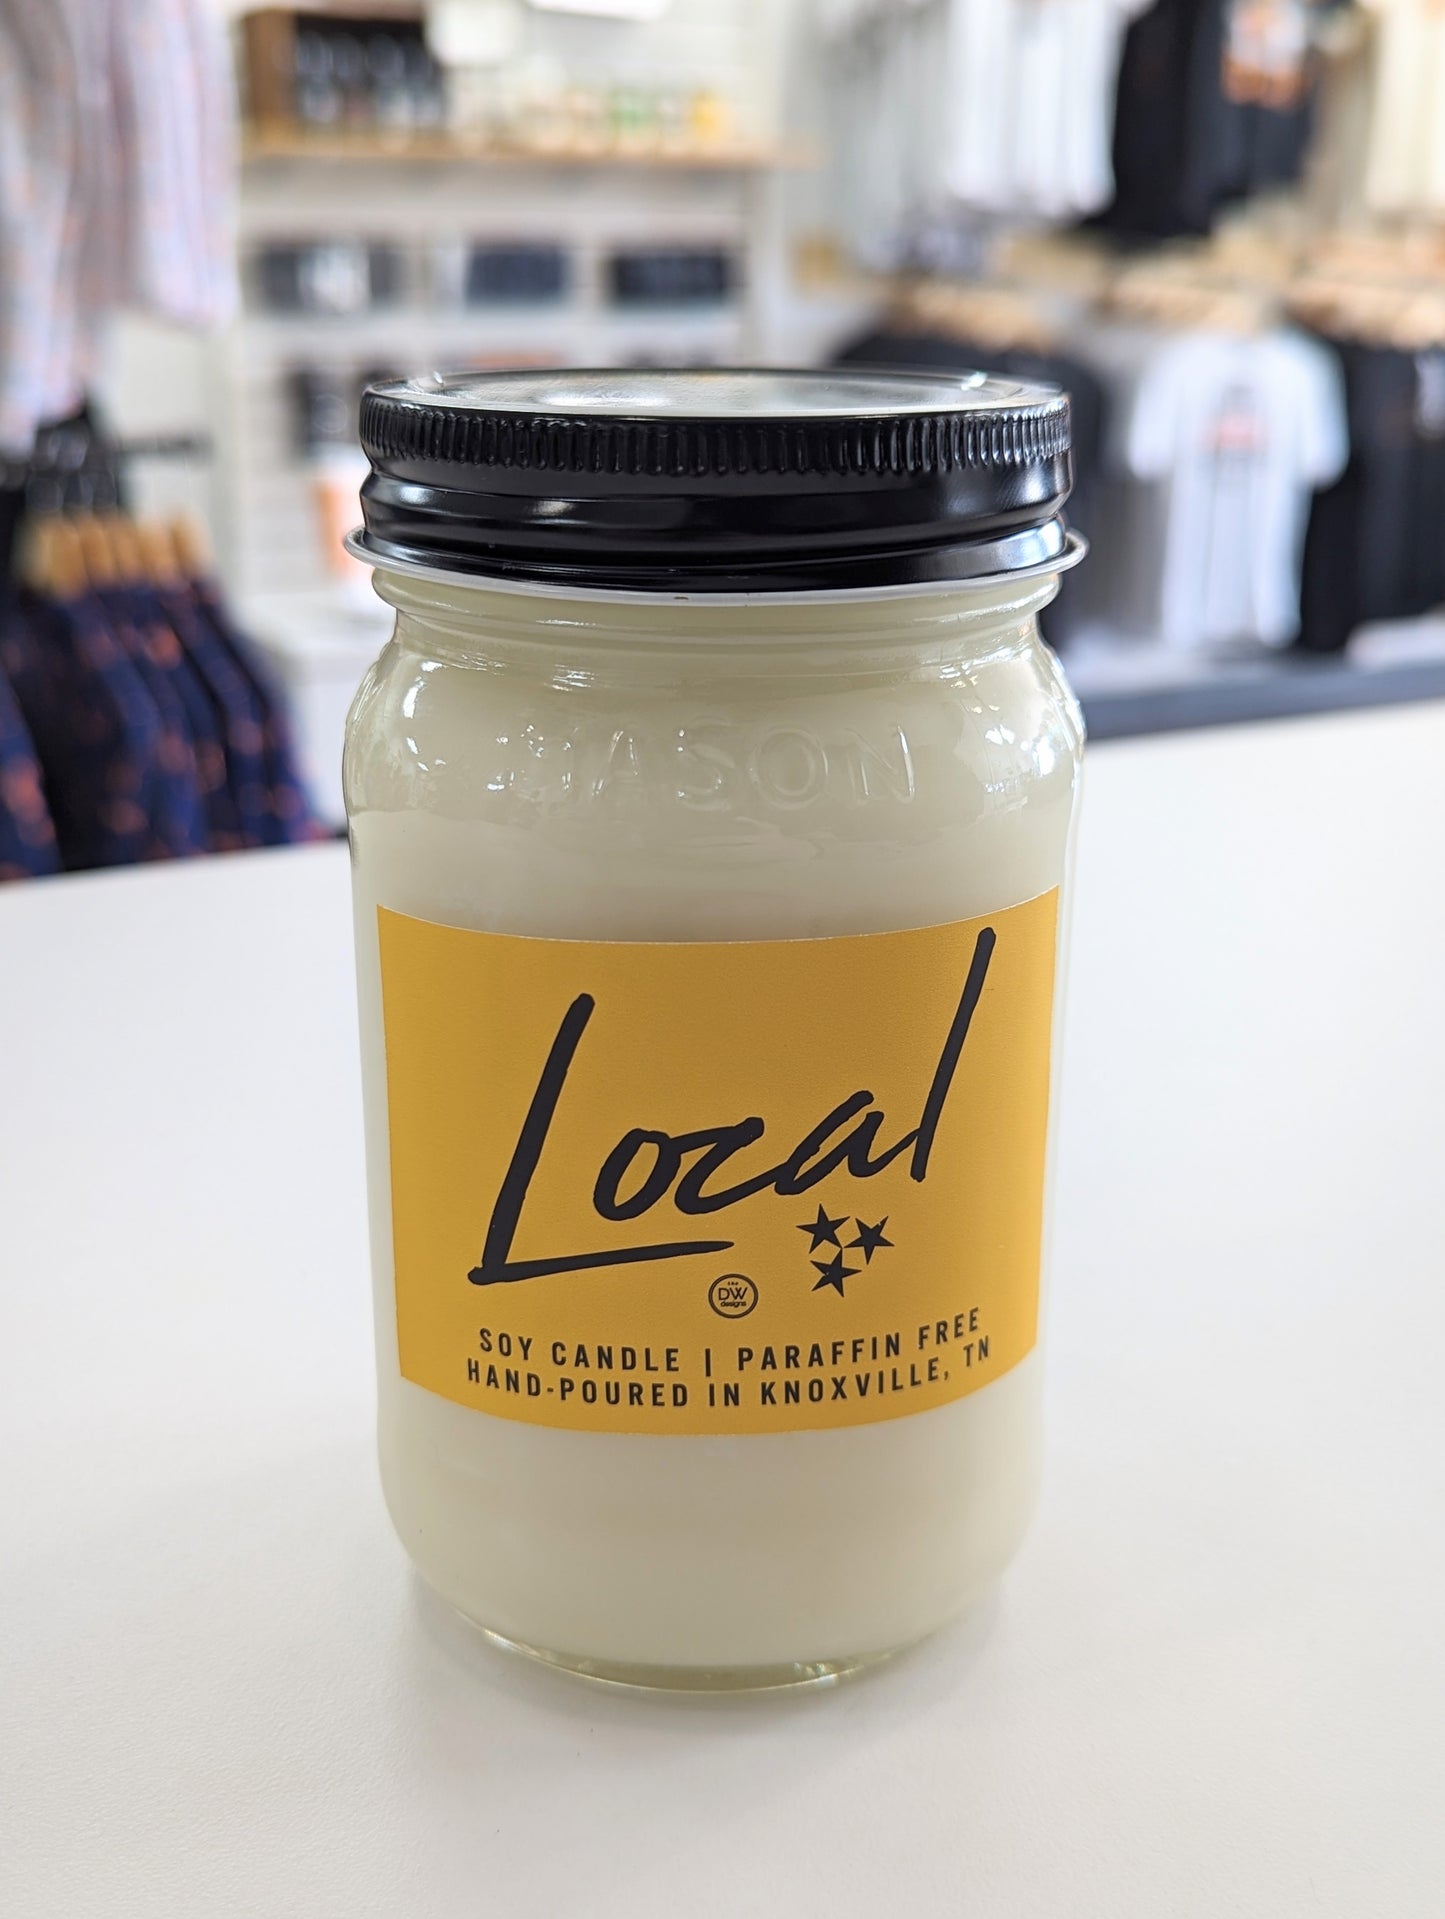 The Local 2.0 Candle